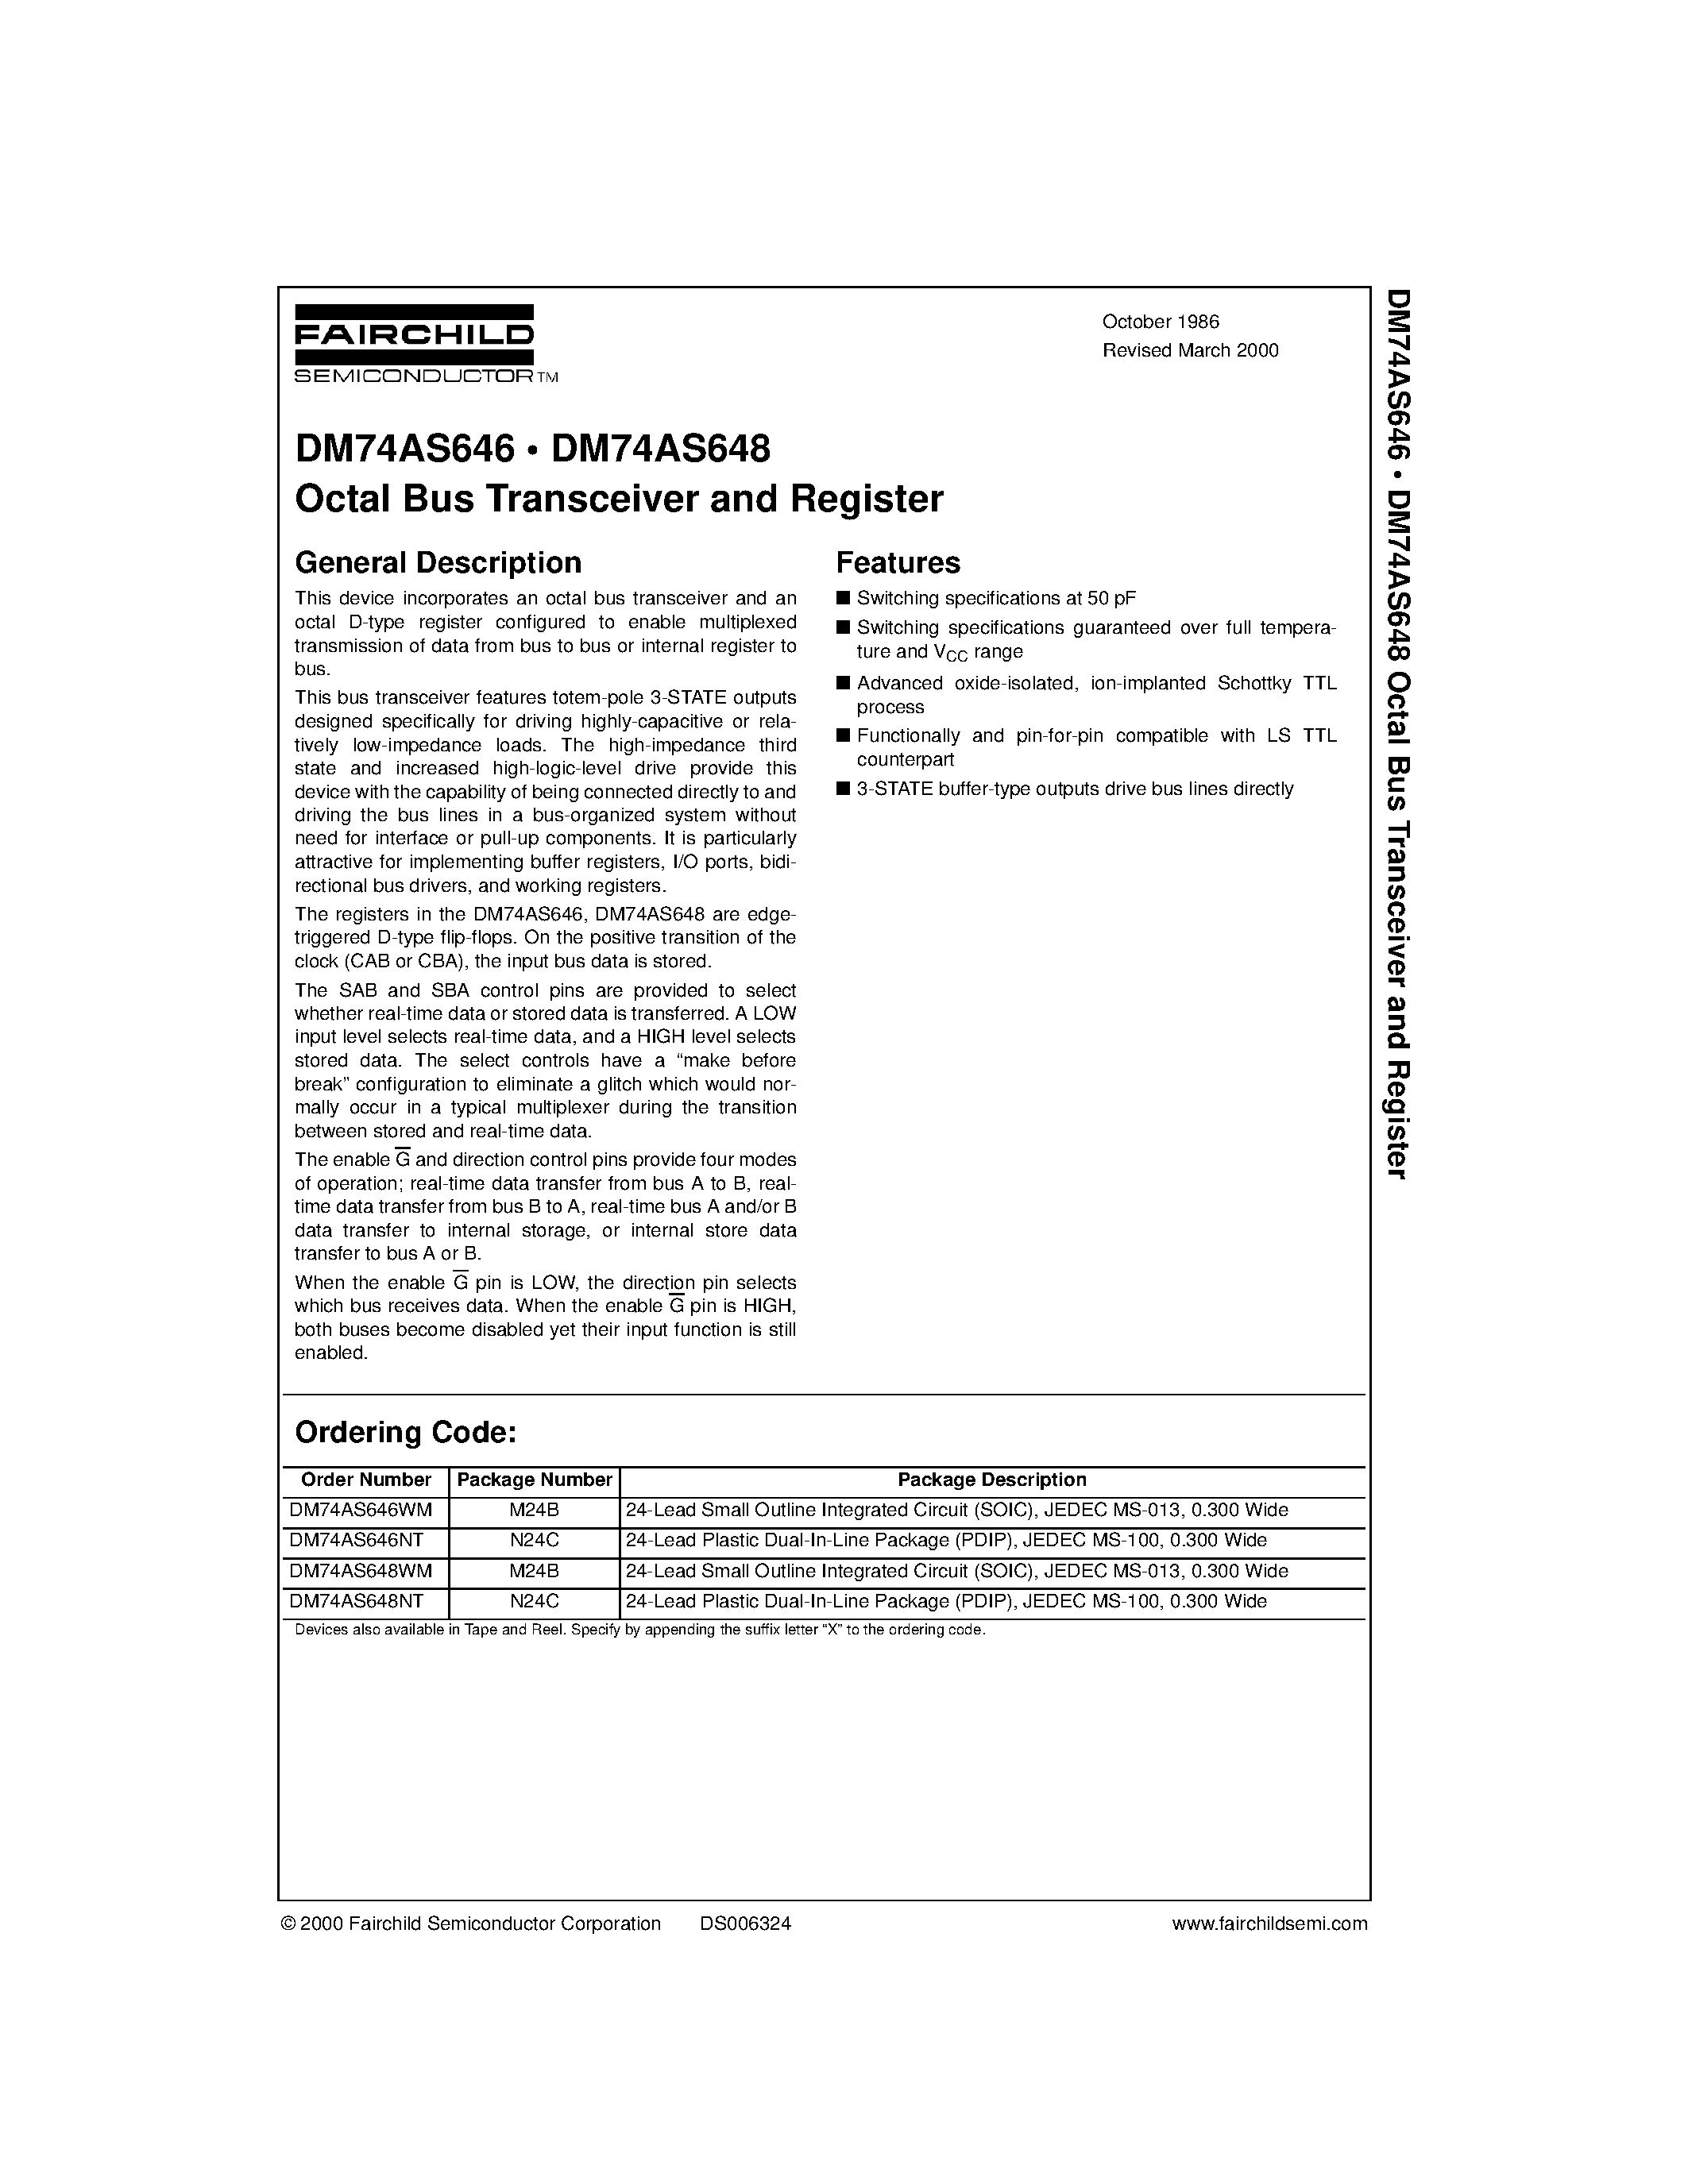 Datasheet DM74AS648NT - Octal Bus Transceiver and Register page 1